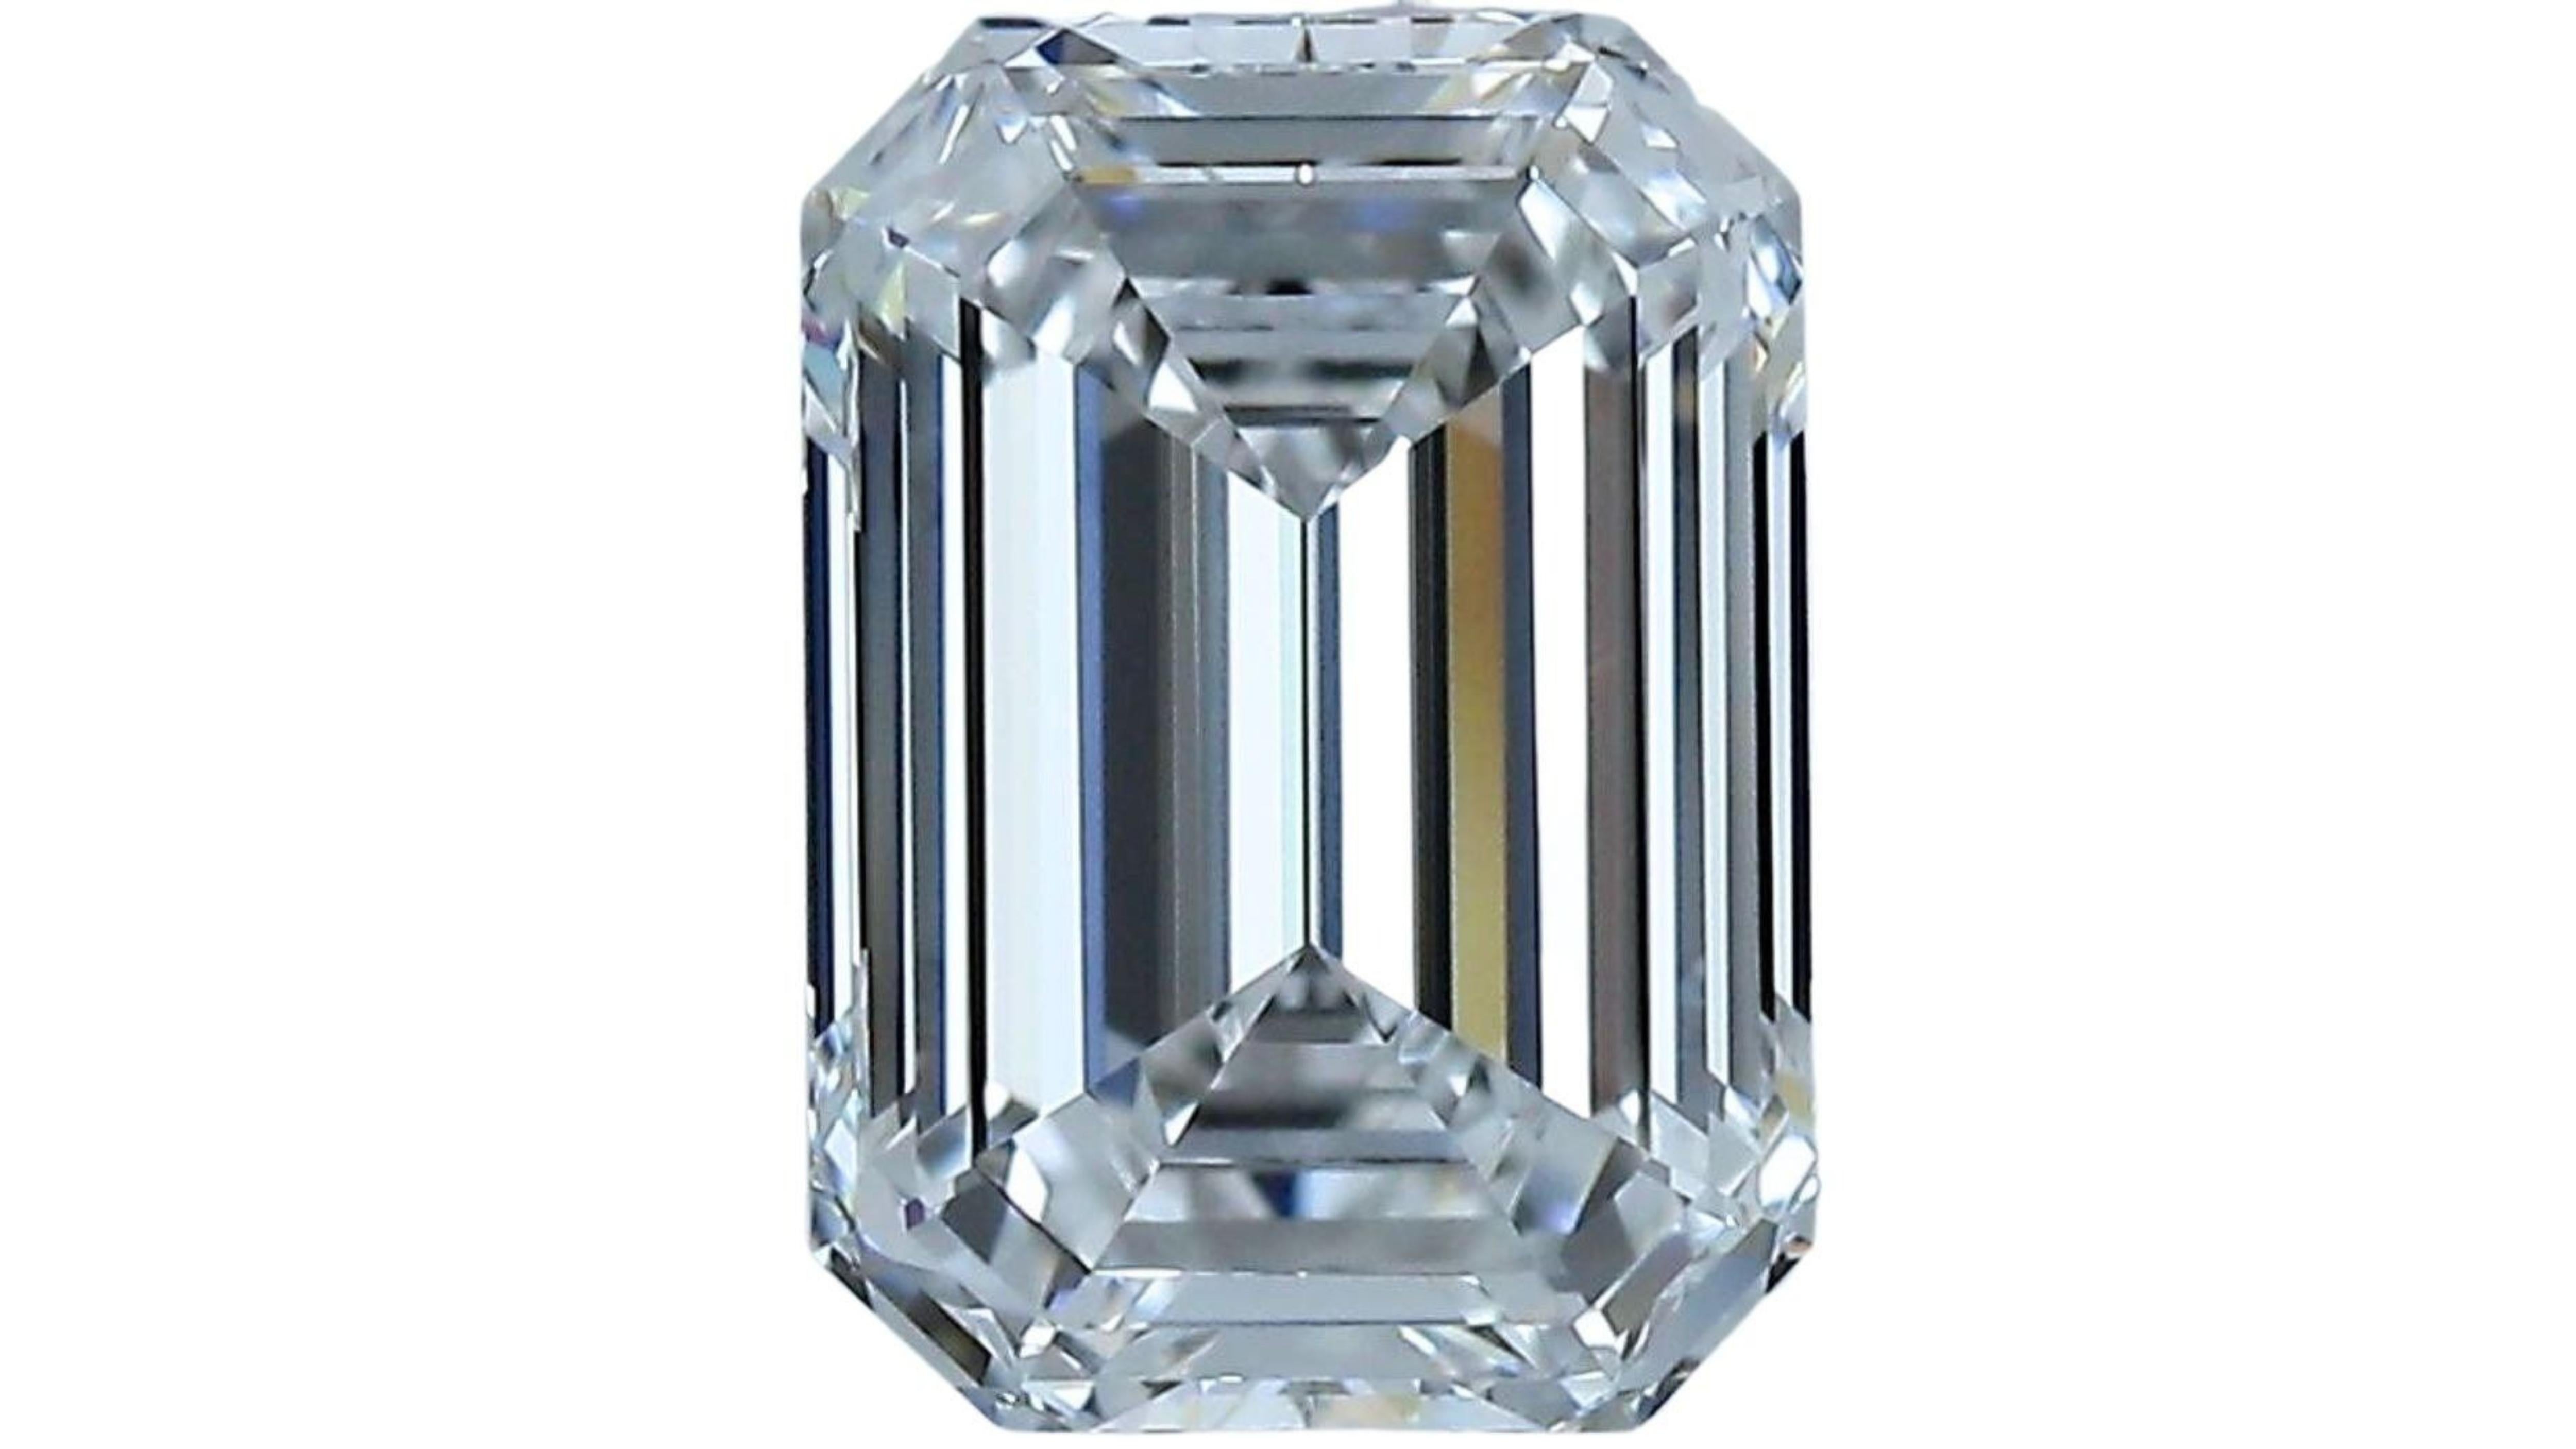 1pc. Shimmering 2.44 Carat Emerald Cut Natural Diamond For Sale 2